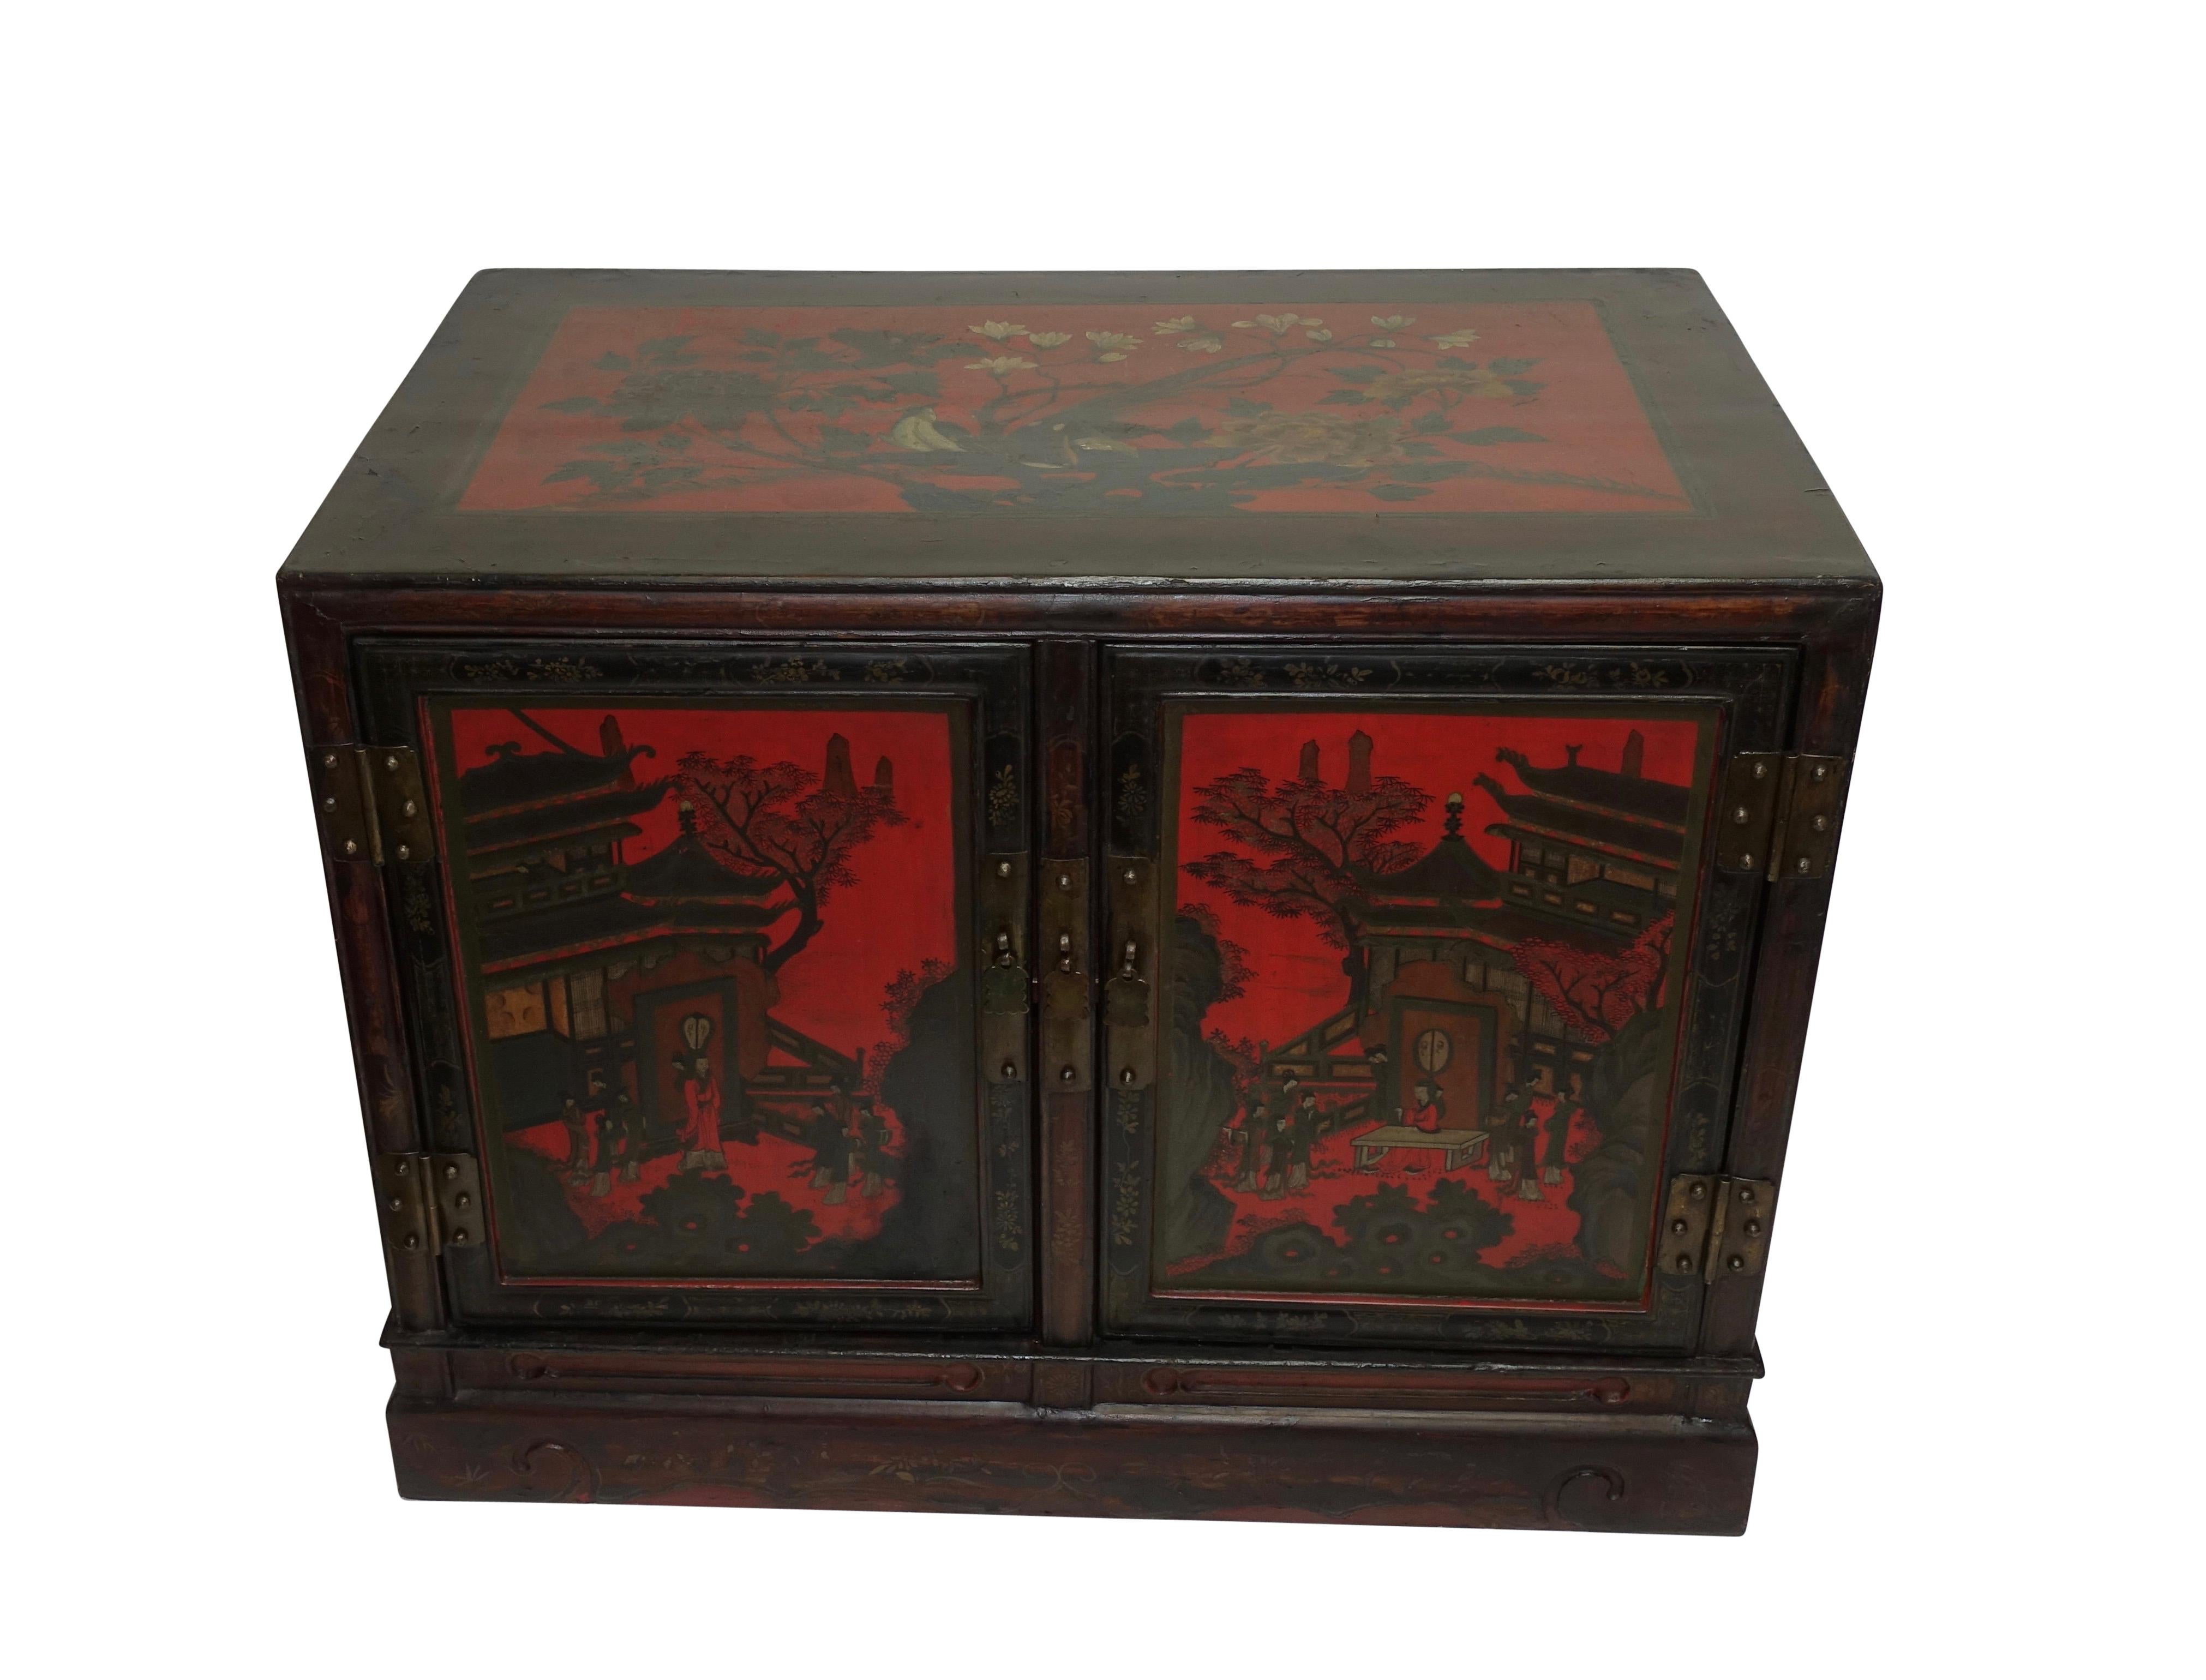 A pair of red and black lacquer ceremonial robe cabinets with a painted garden scene of figures and flowers, having brass hardware and handles. The back side has been lacquered and painted as well. China, Qing dynasty, mid-19th century.